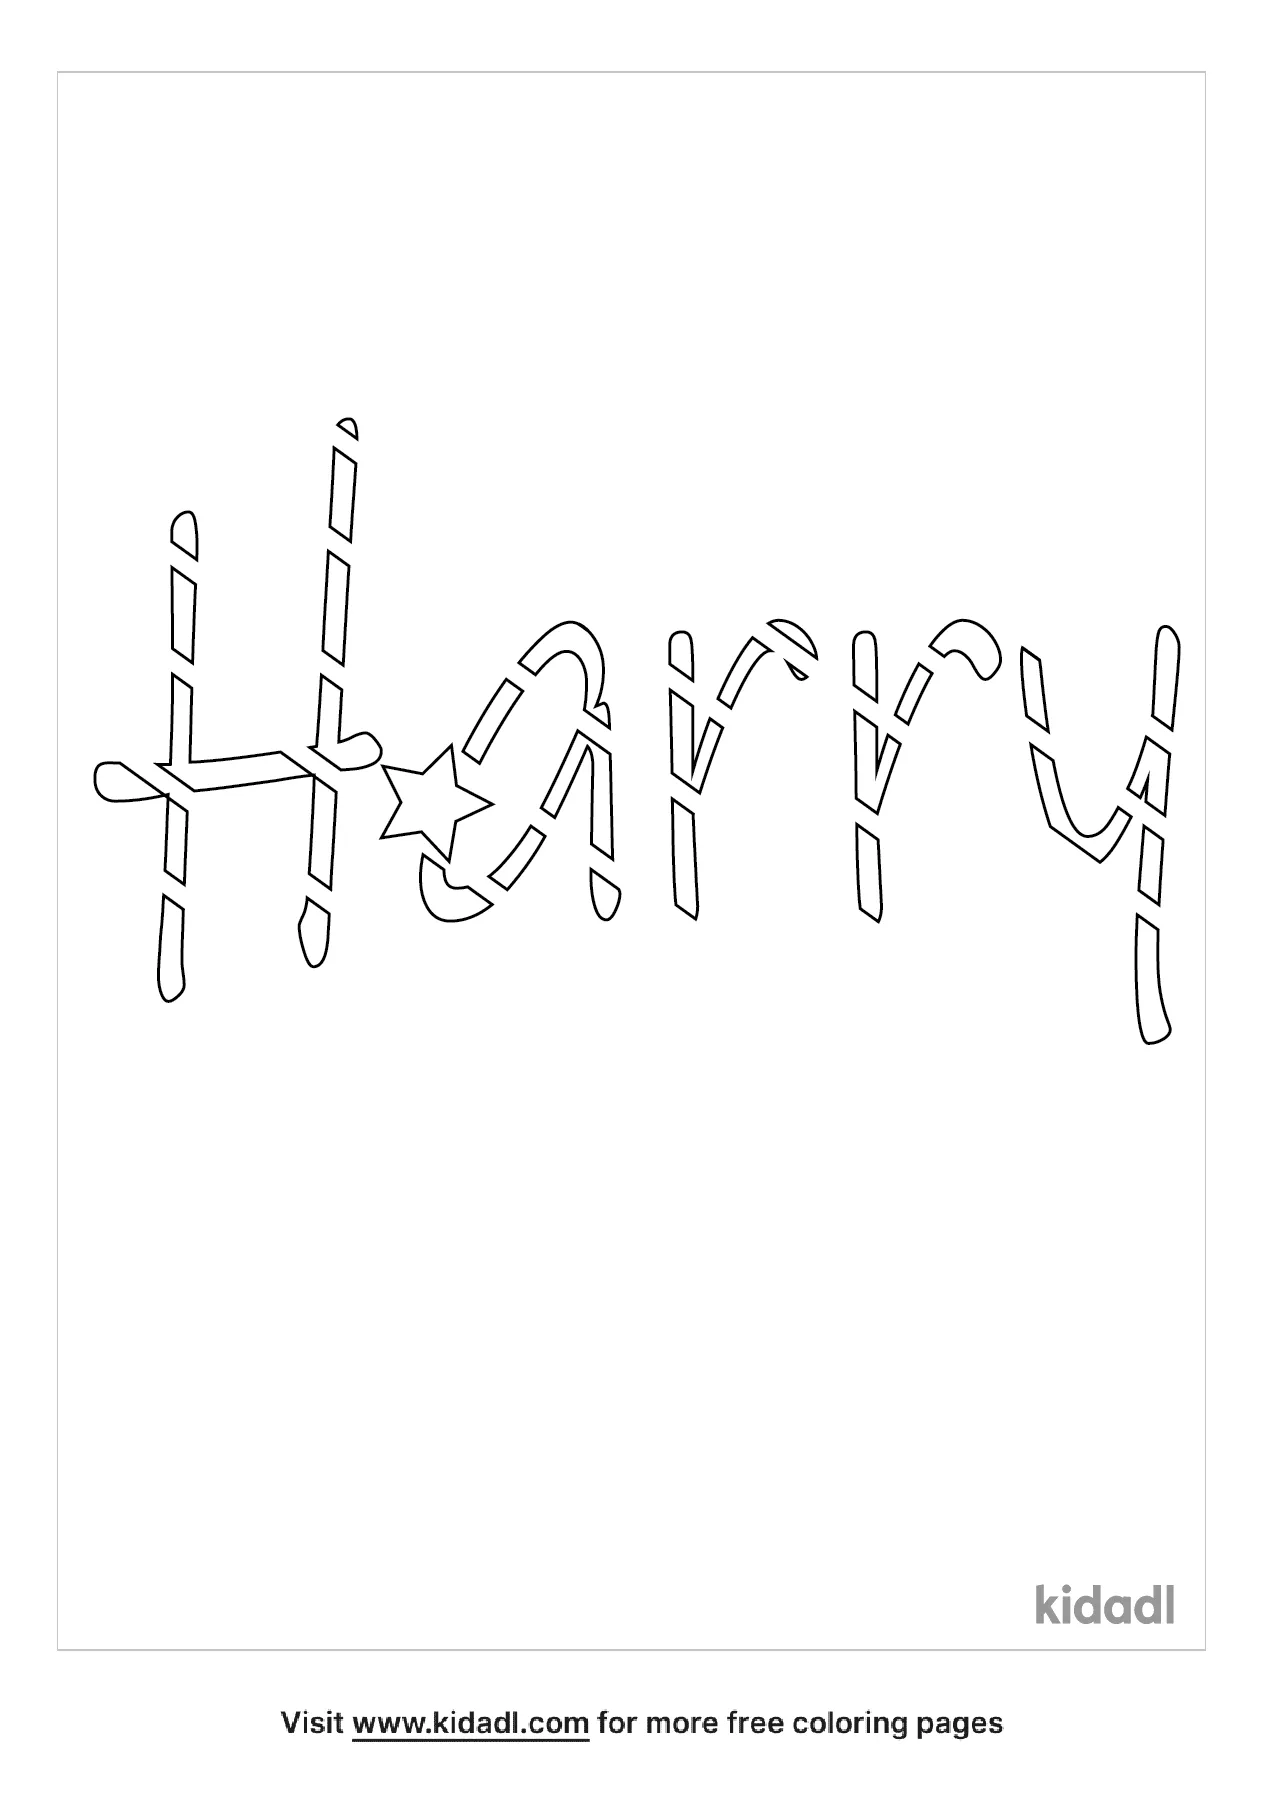 Name Harry Coloring Page